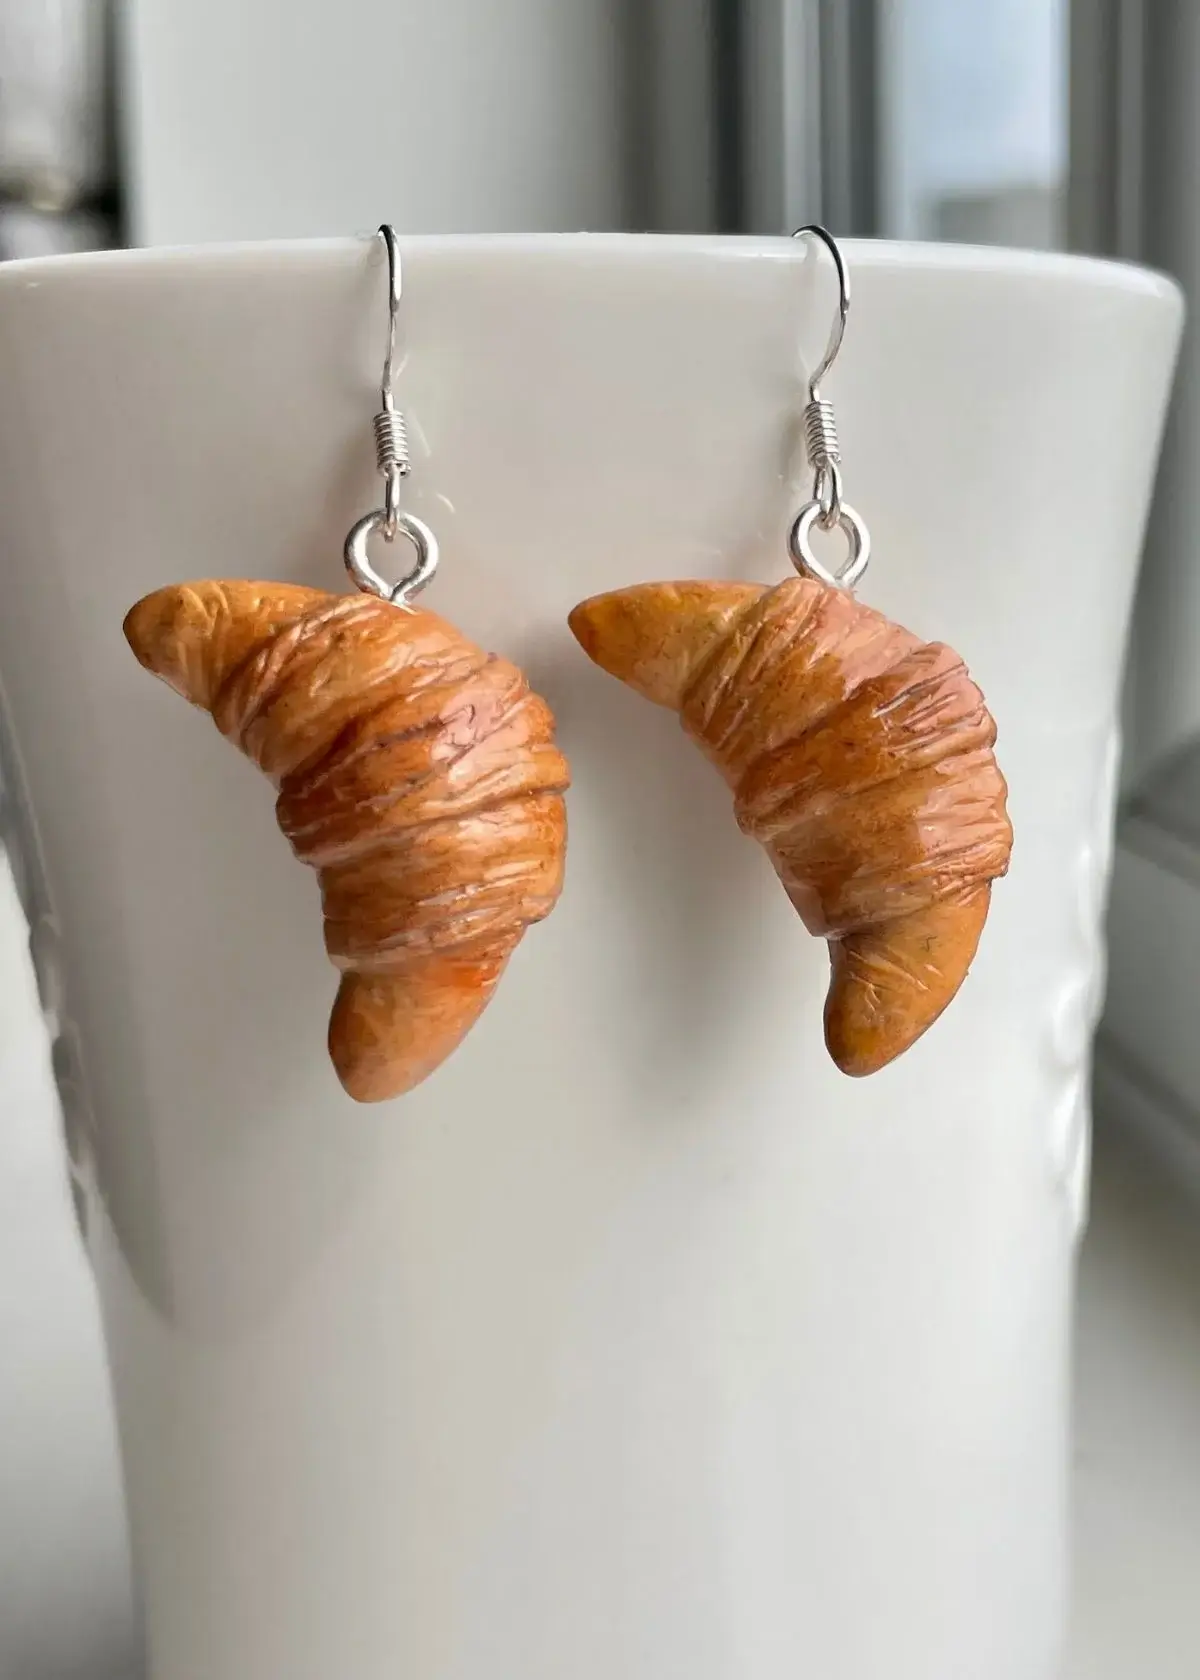 What Materials are Croissant Earrings Made From?